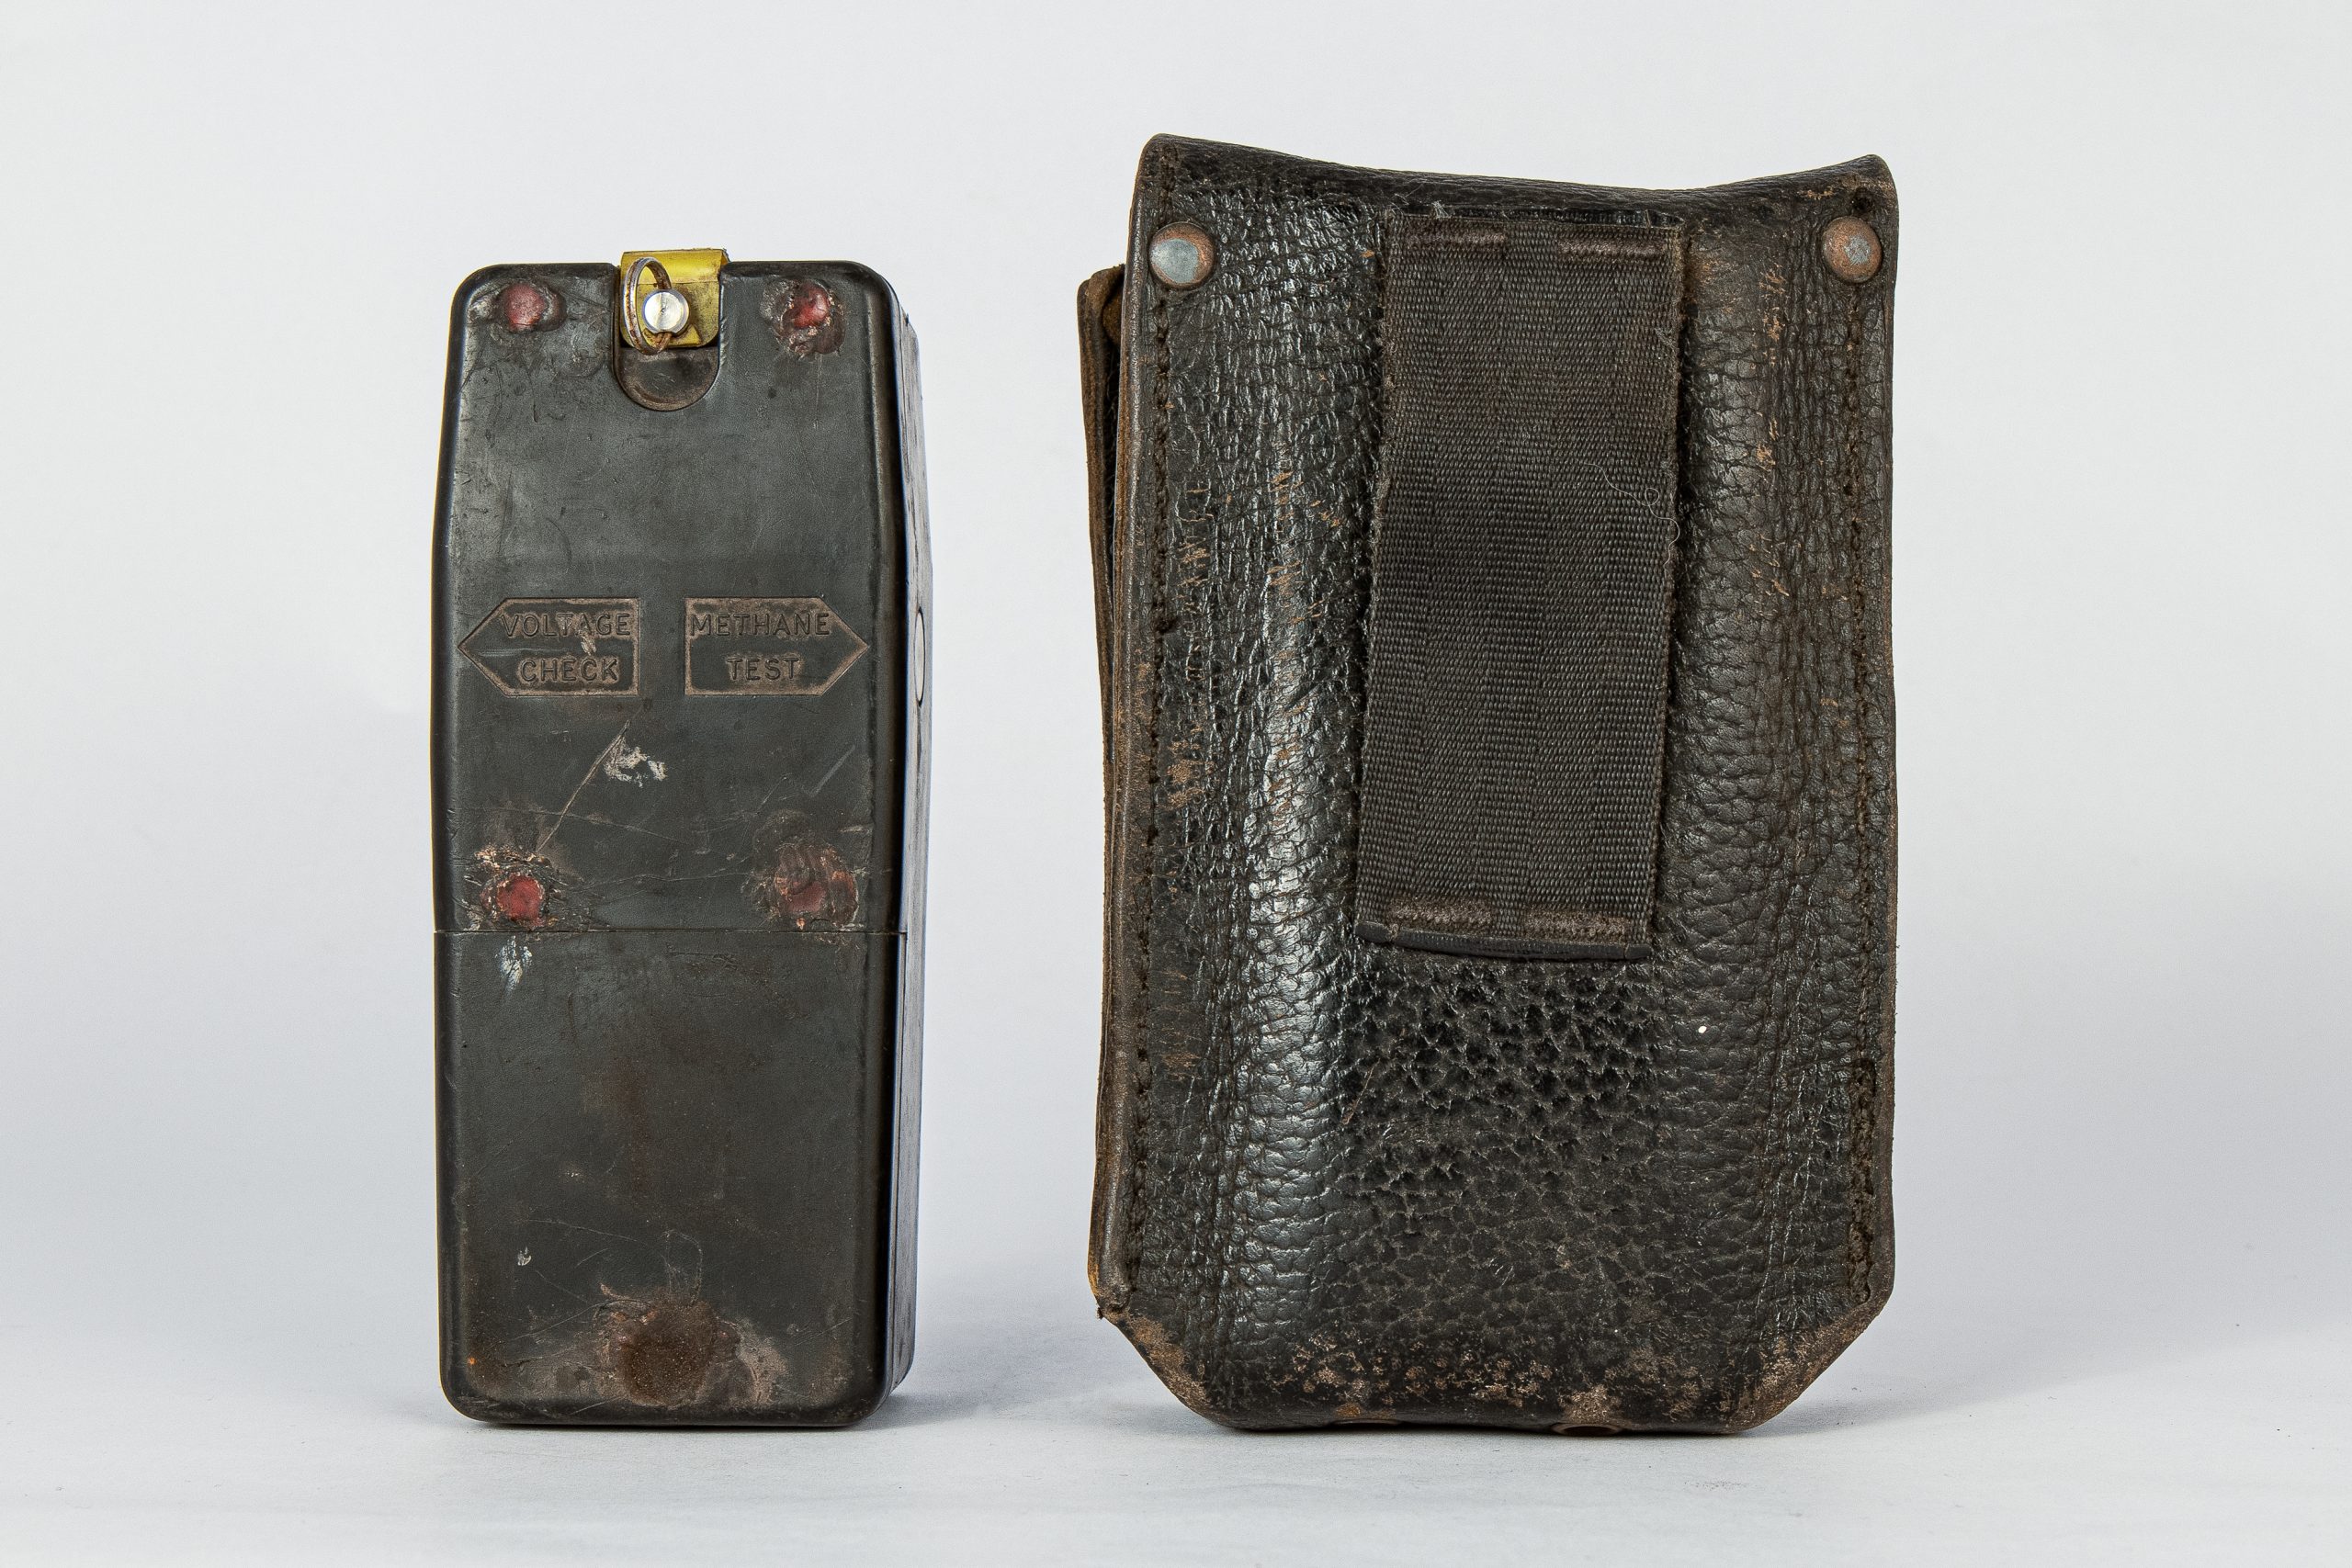 Back of device shaped like an old Nokia mobile phone. Beside it is a leather pouch to hold the device.